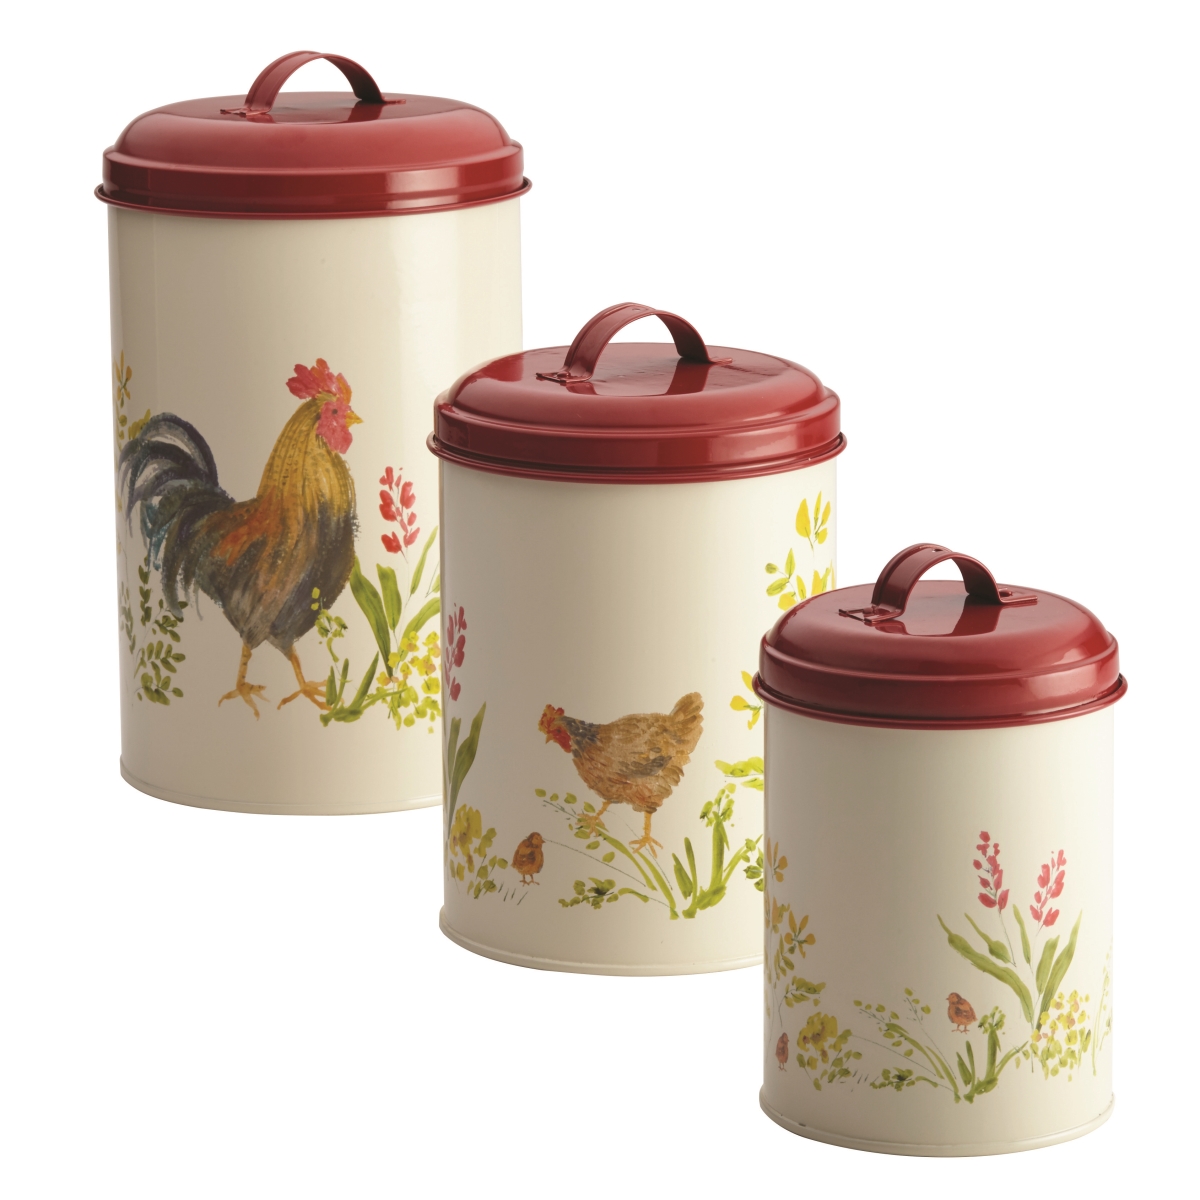 46595 3 Piece Garden Rooster Pantry Ware Food Storage Canister Set